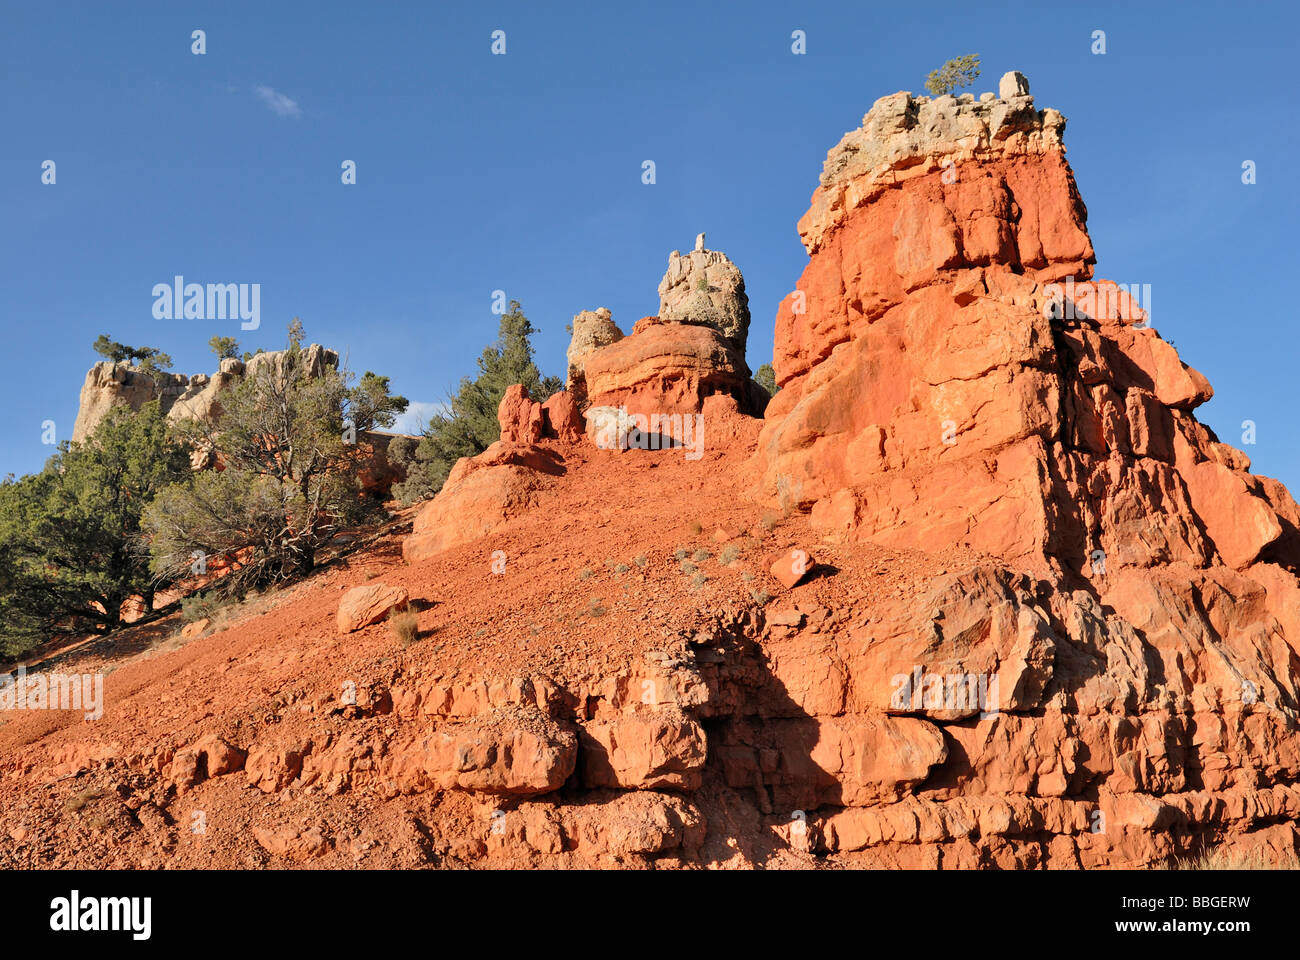 Rock formation in Red Canyon, Dixie National Forest, Utah, USA Stock Photo